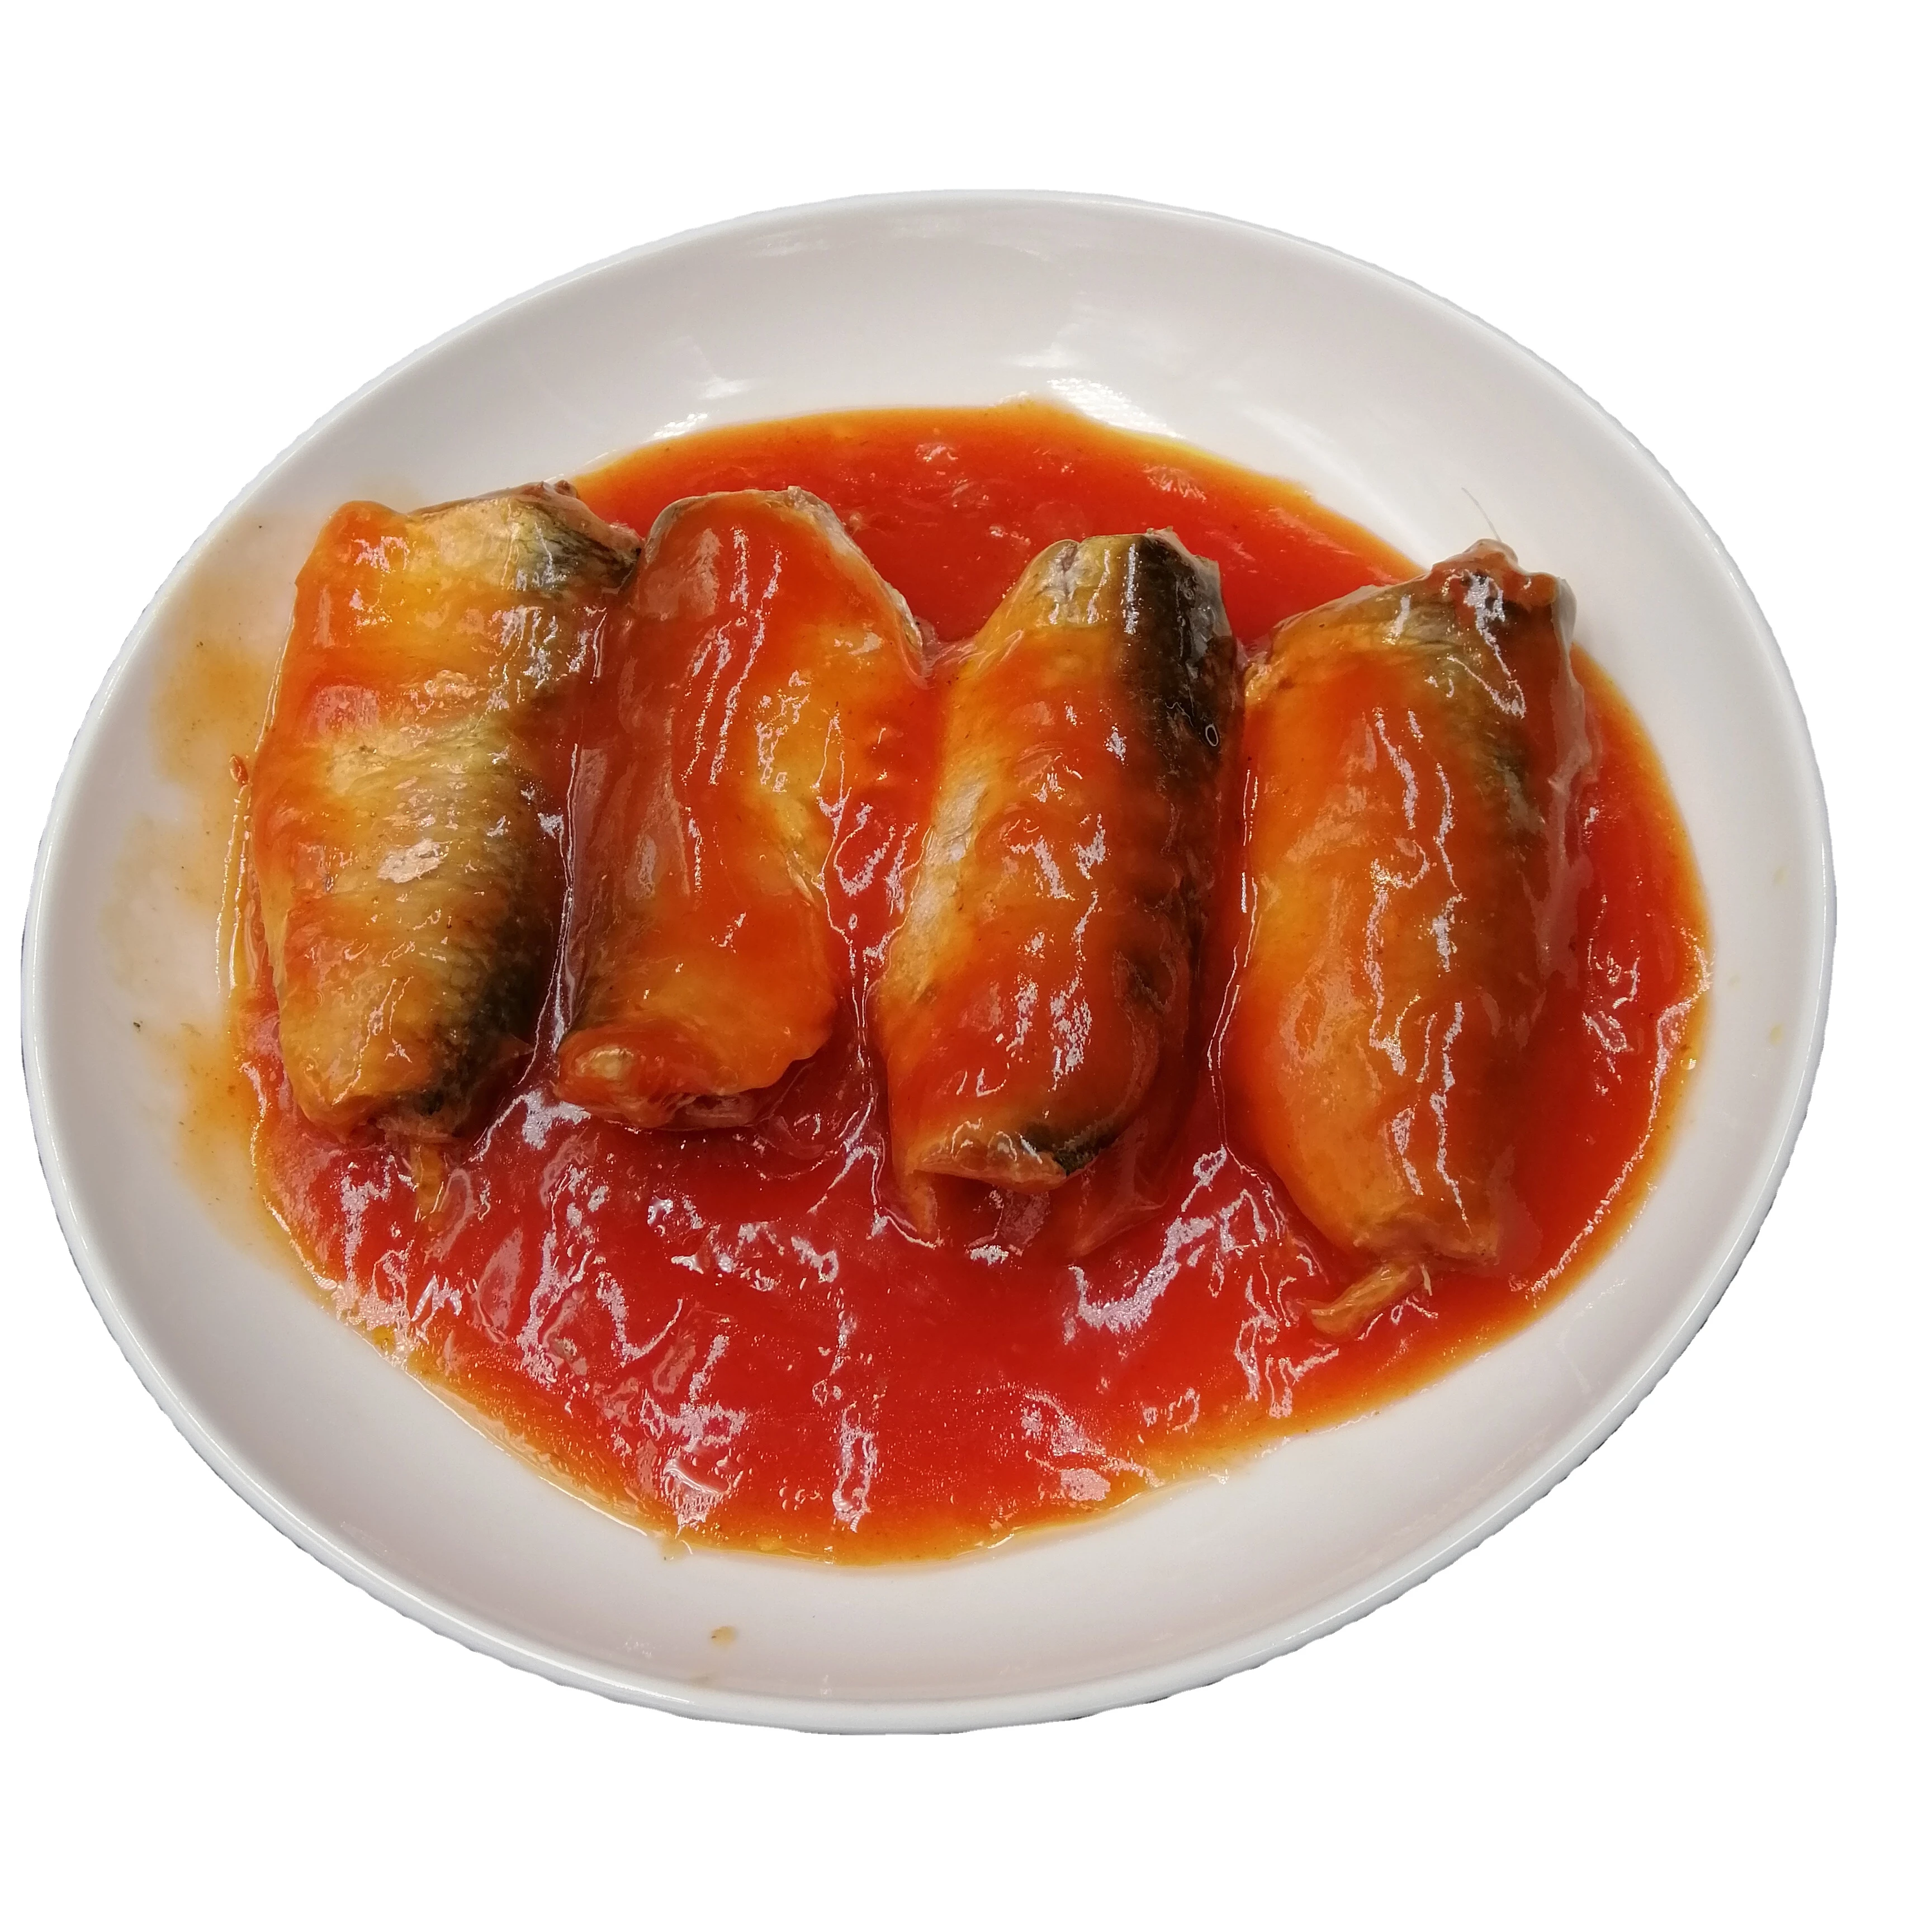 Types of canned sardine fish in tomato sauce